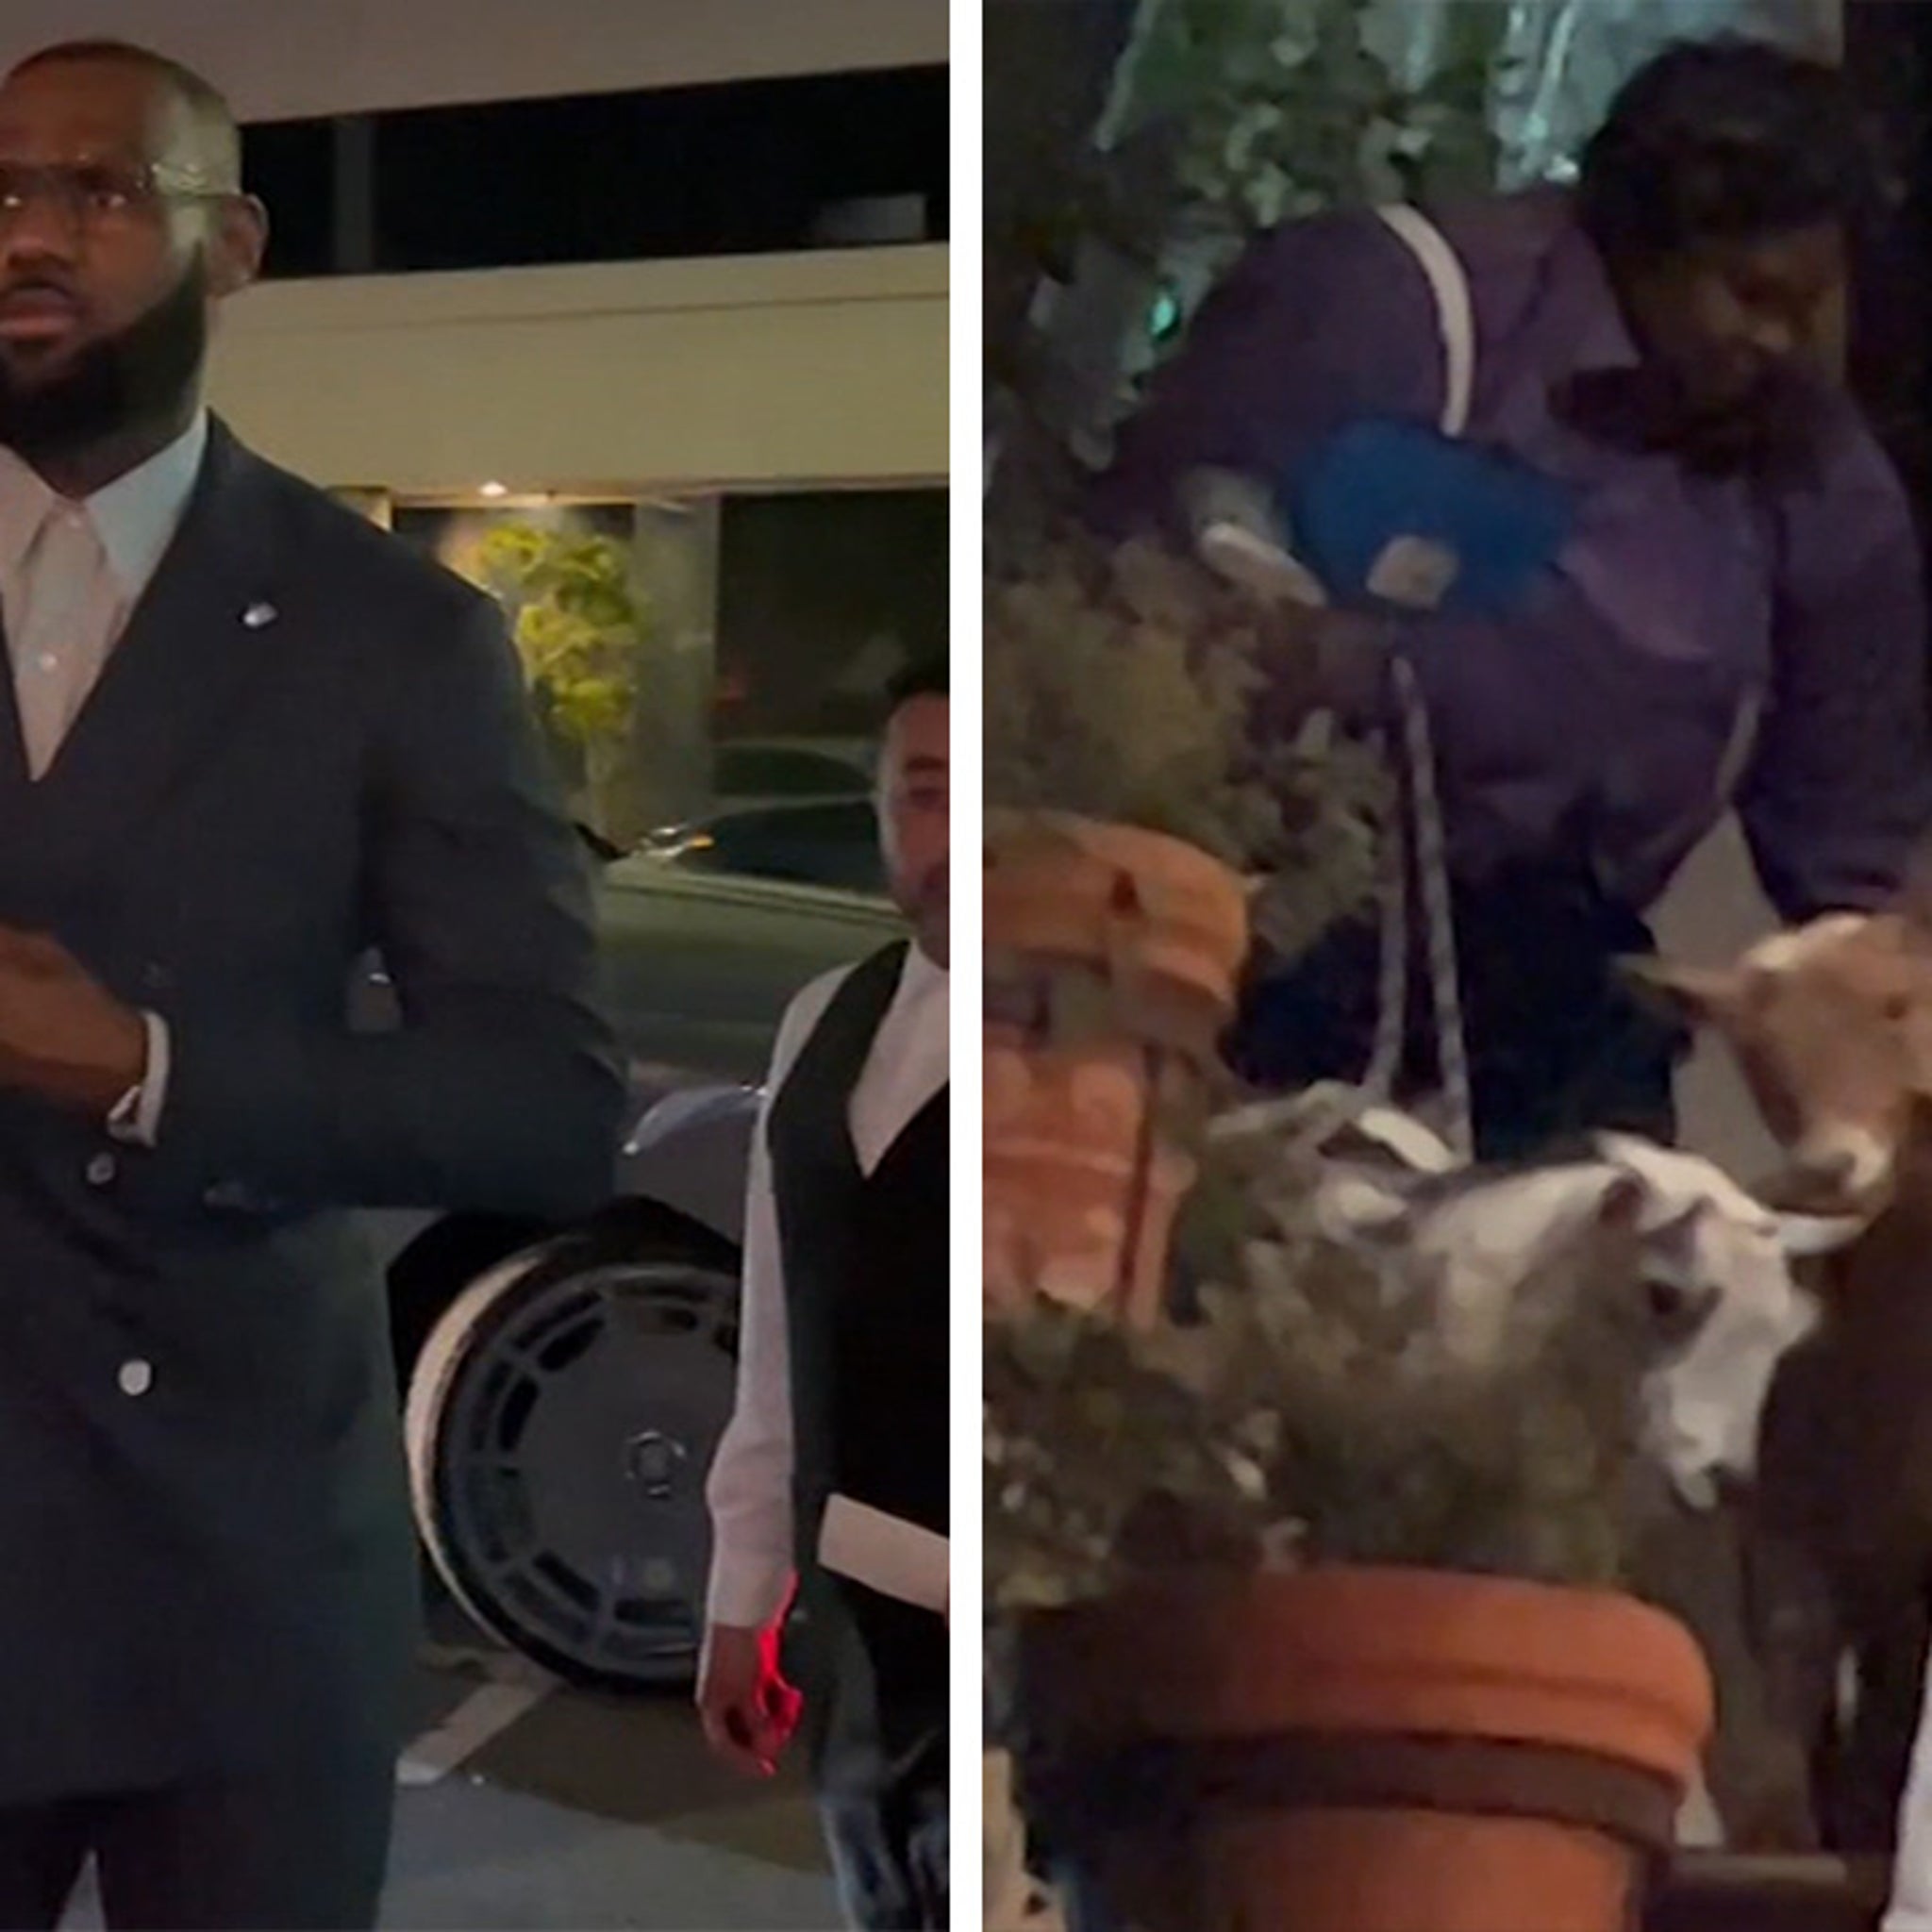 LeBron James Hosts Two Goats At Dinner Party With Savannah, Friends